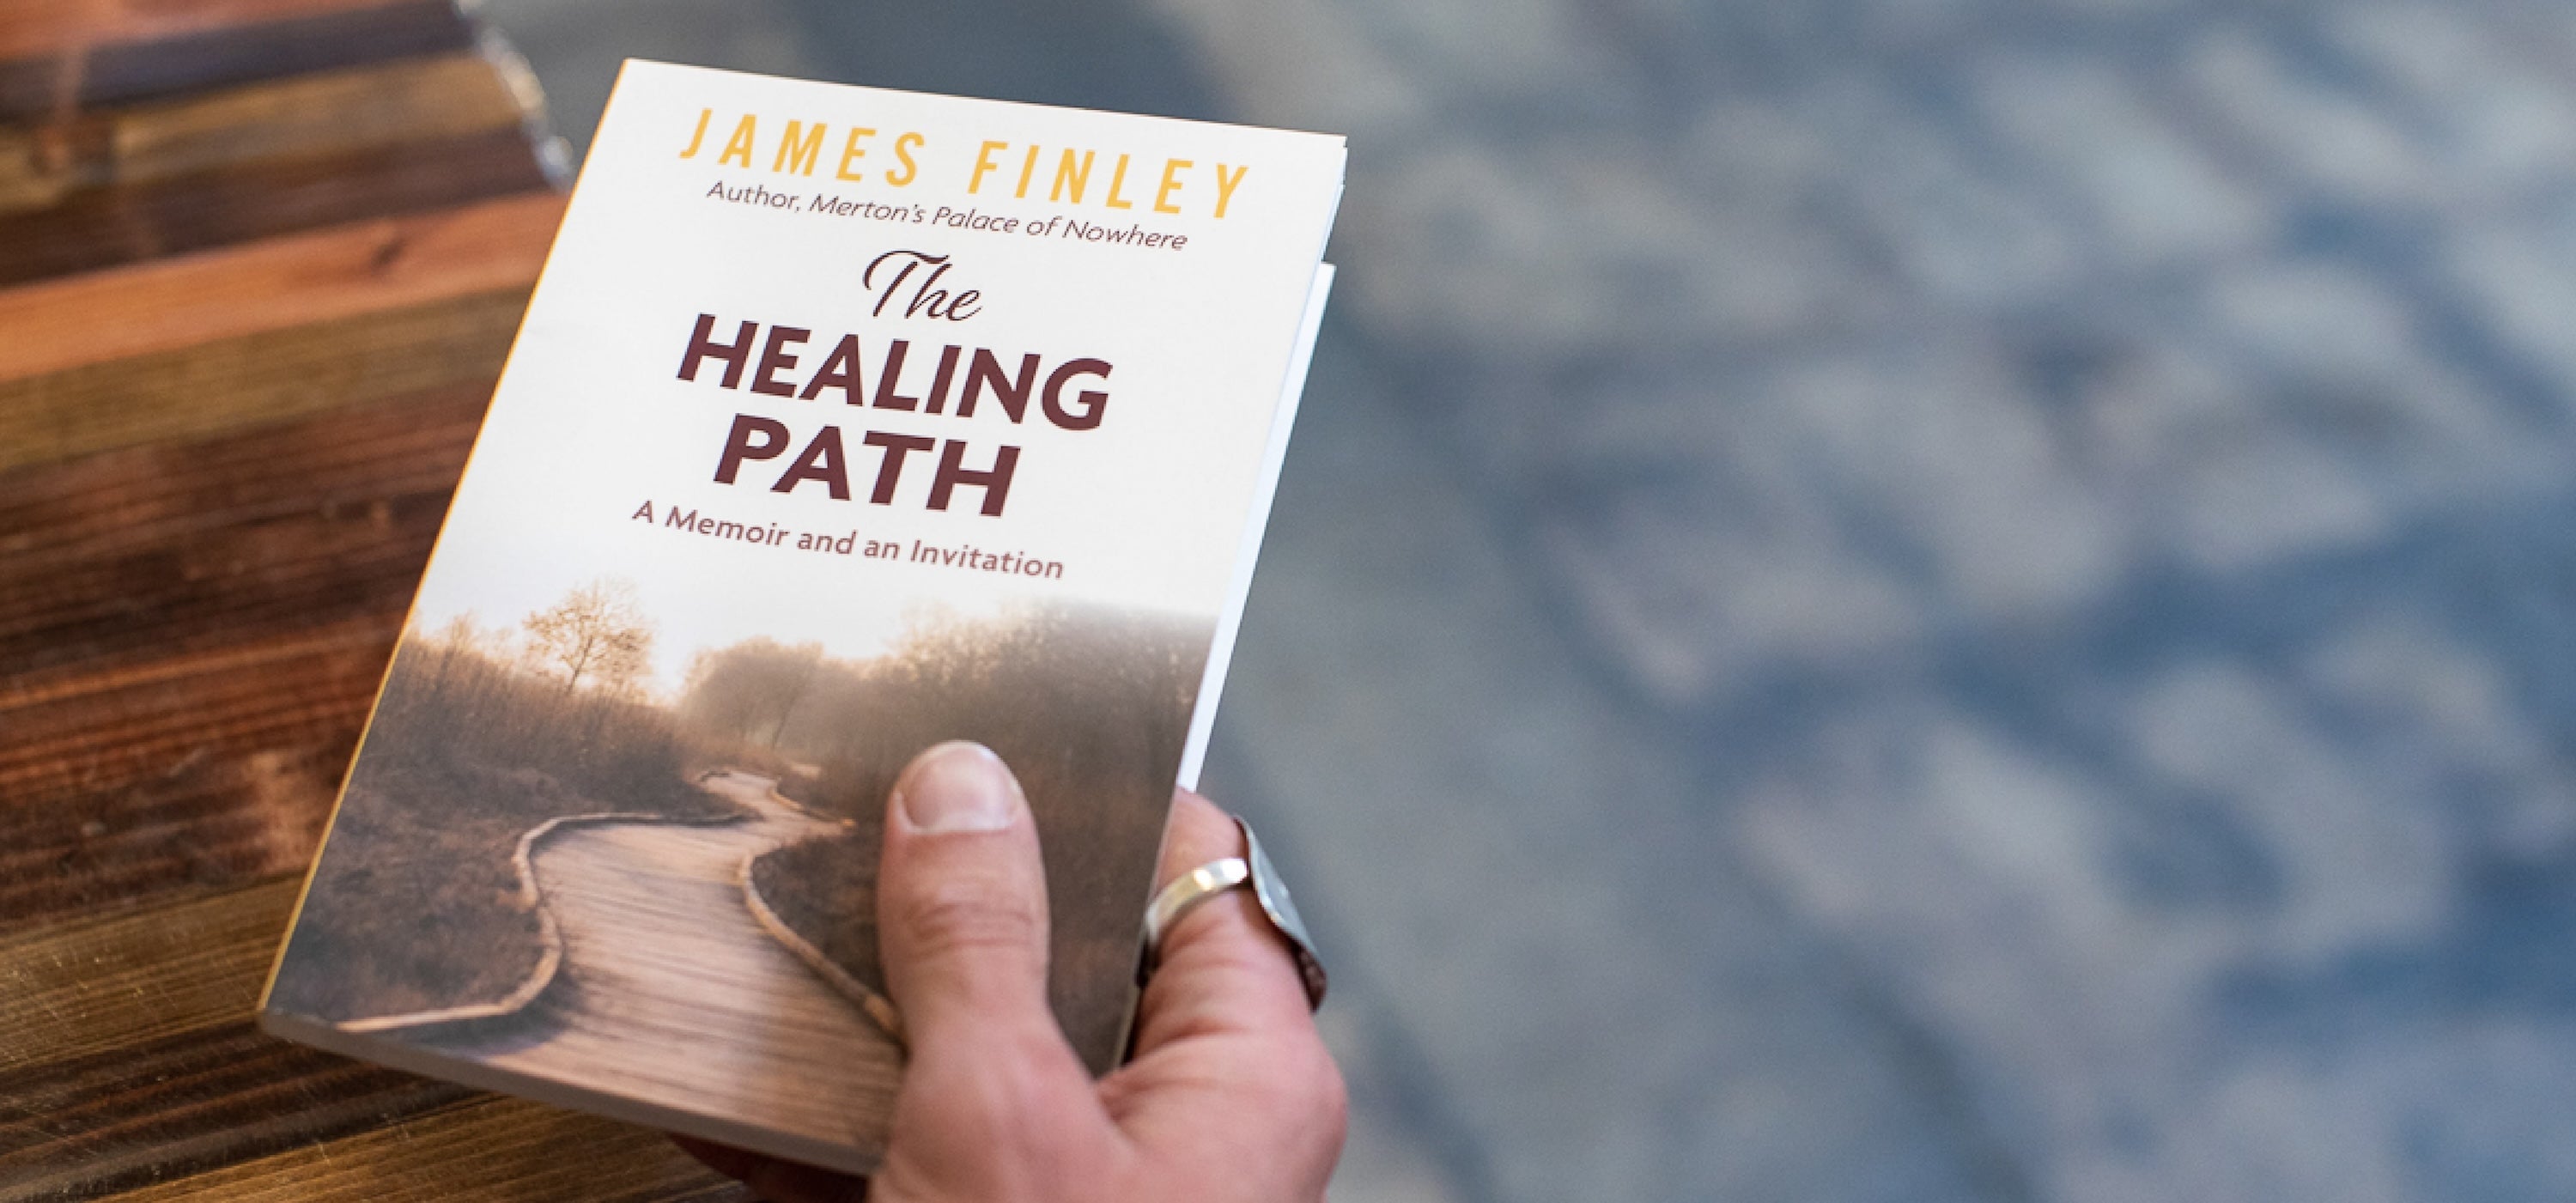 Image of James Finley's The Healing Path